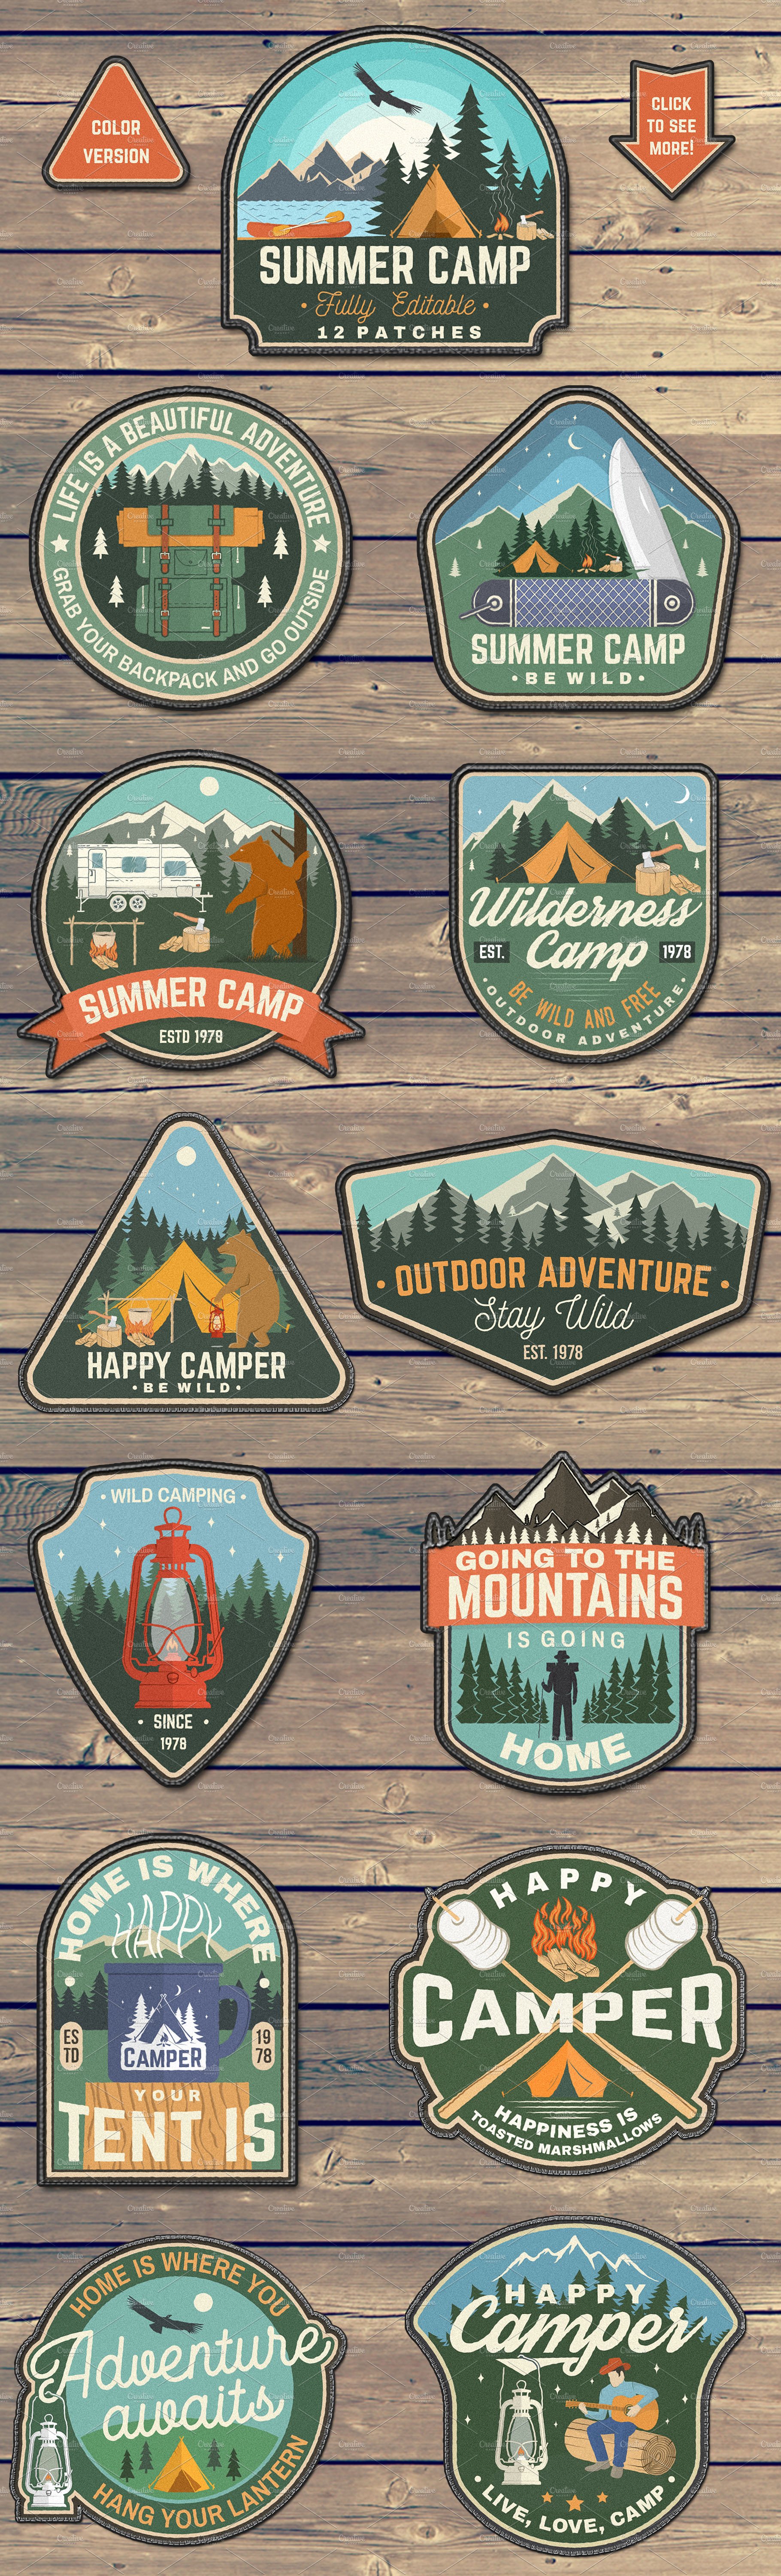 Summer Camp Patches Part 2 preview image.